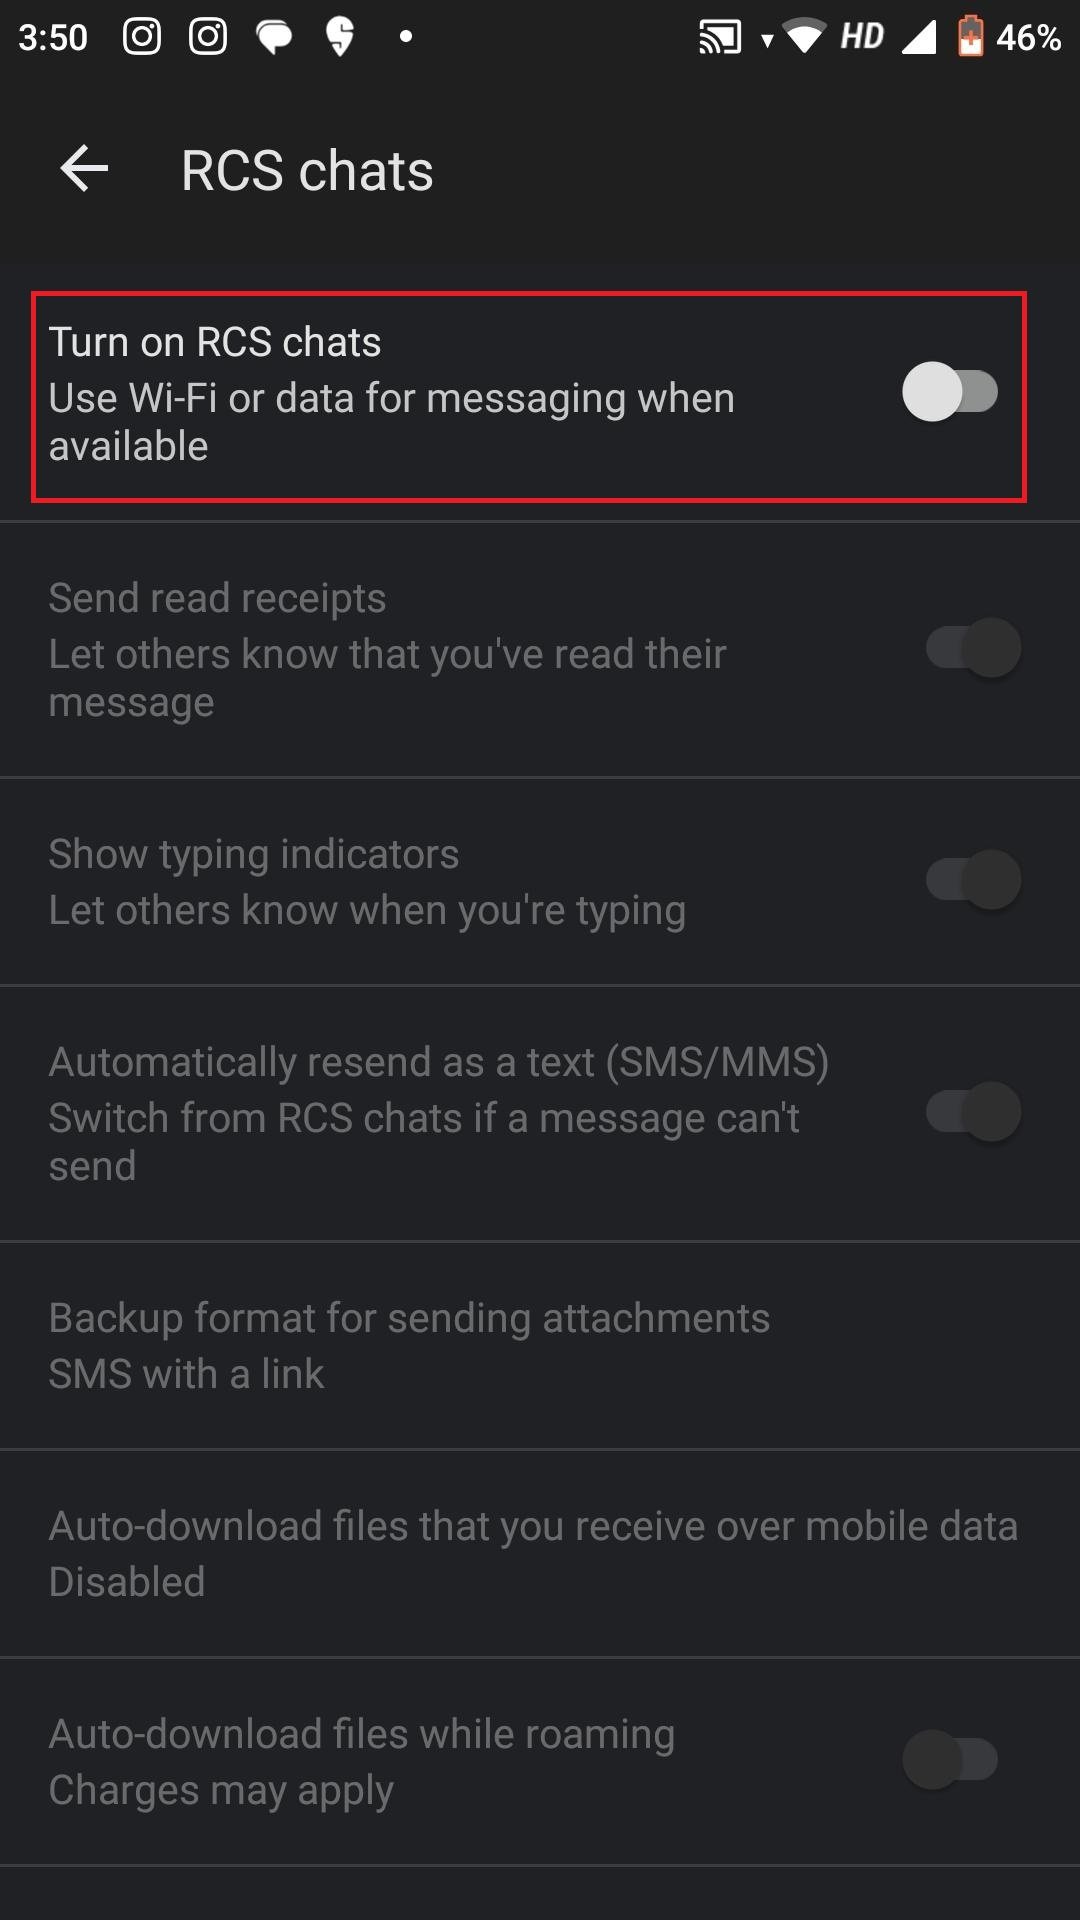 Turn the toggle off for Turn on RCS Chats.